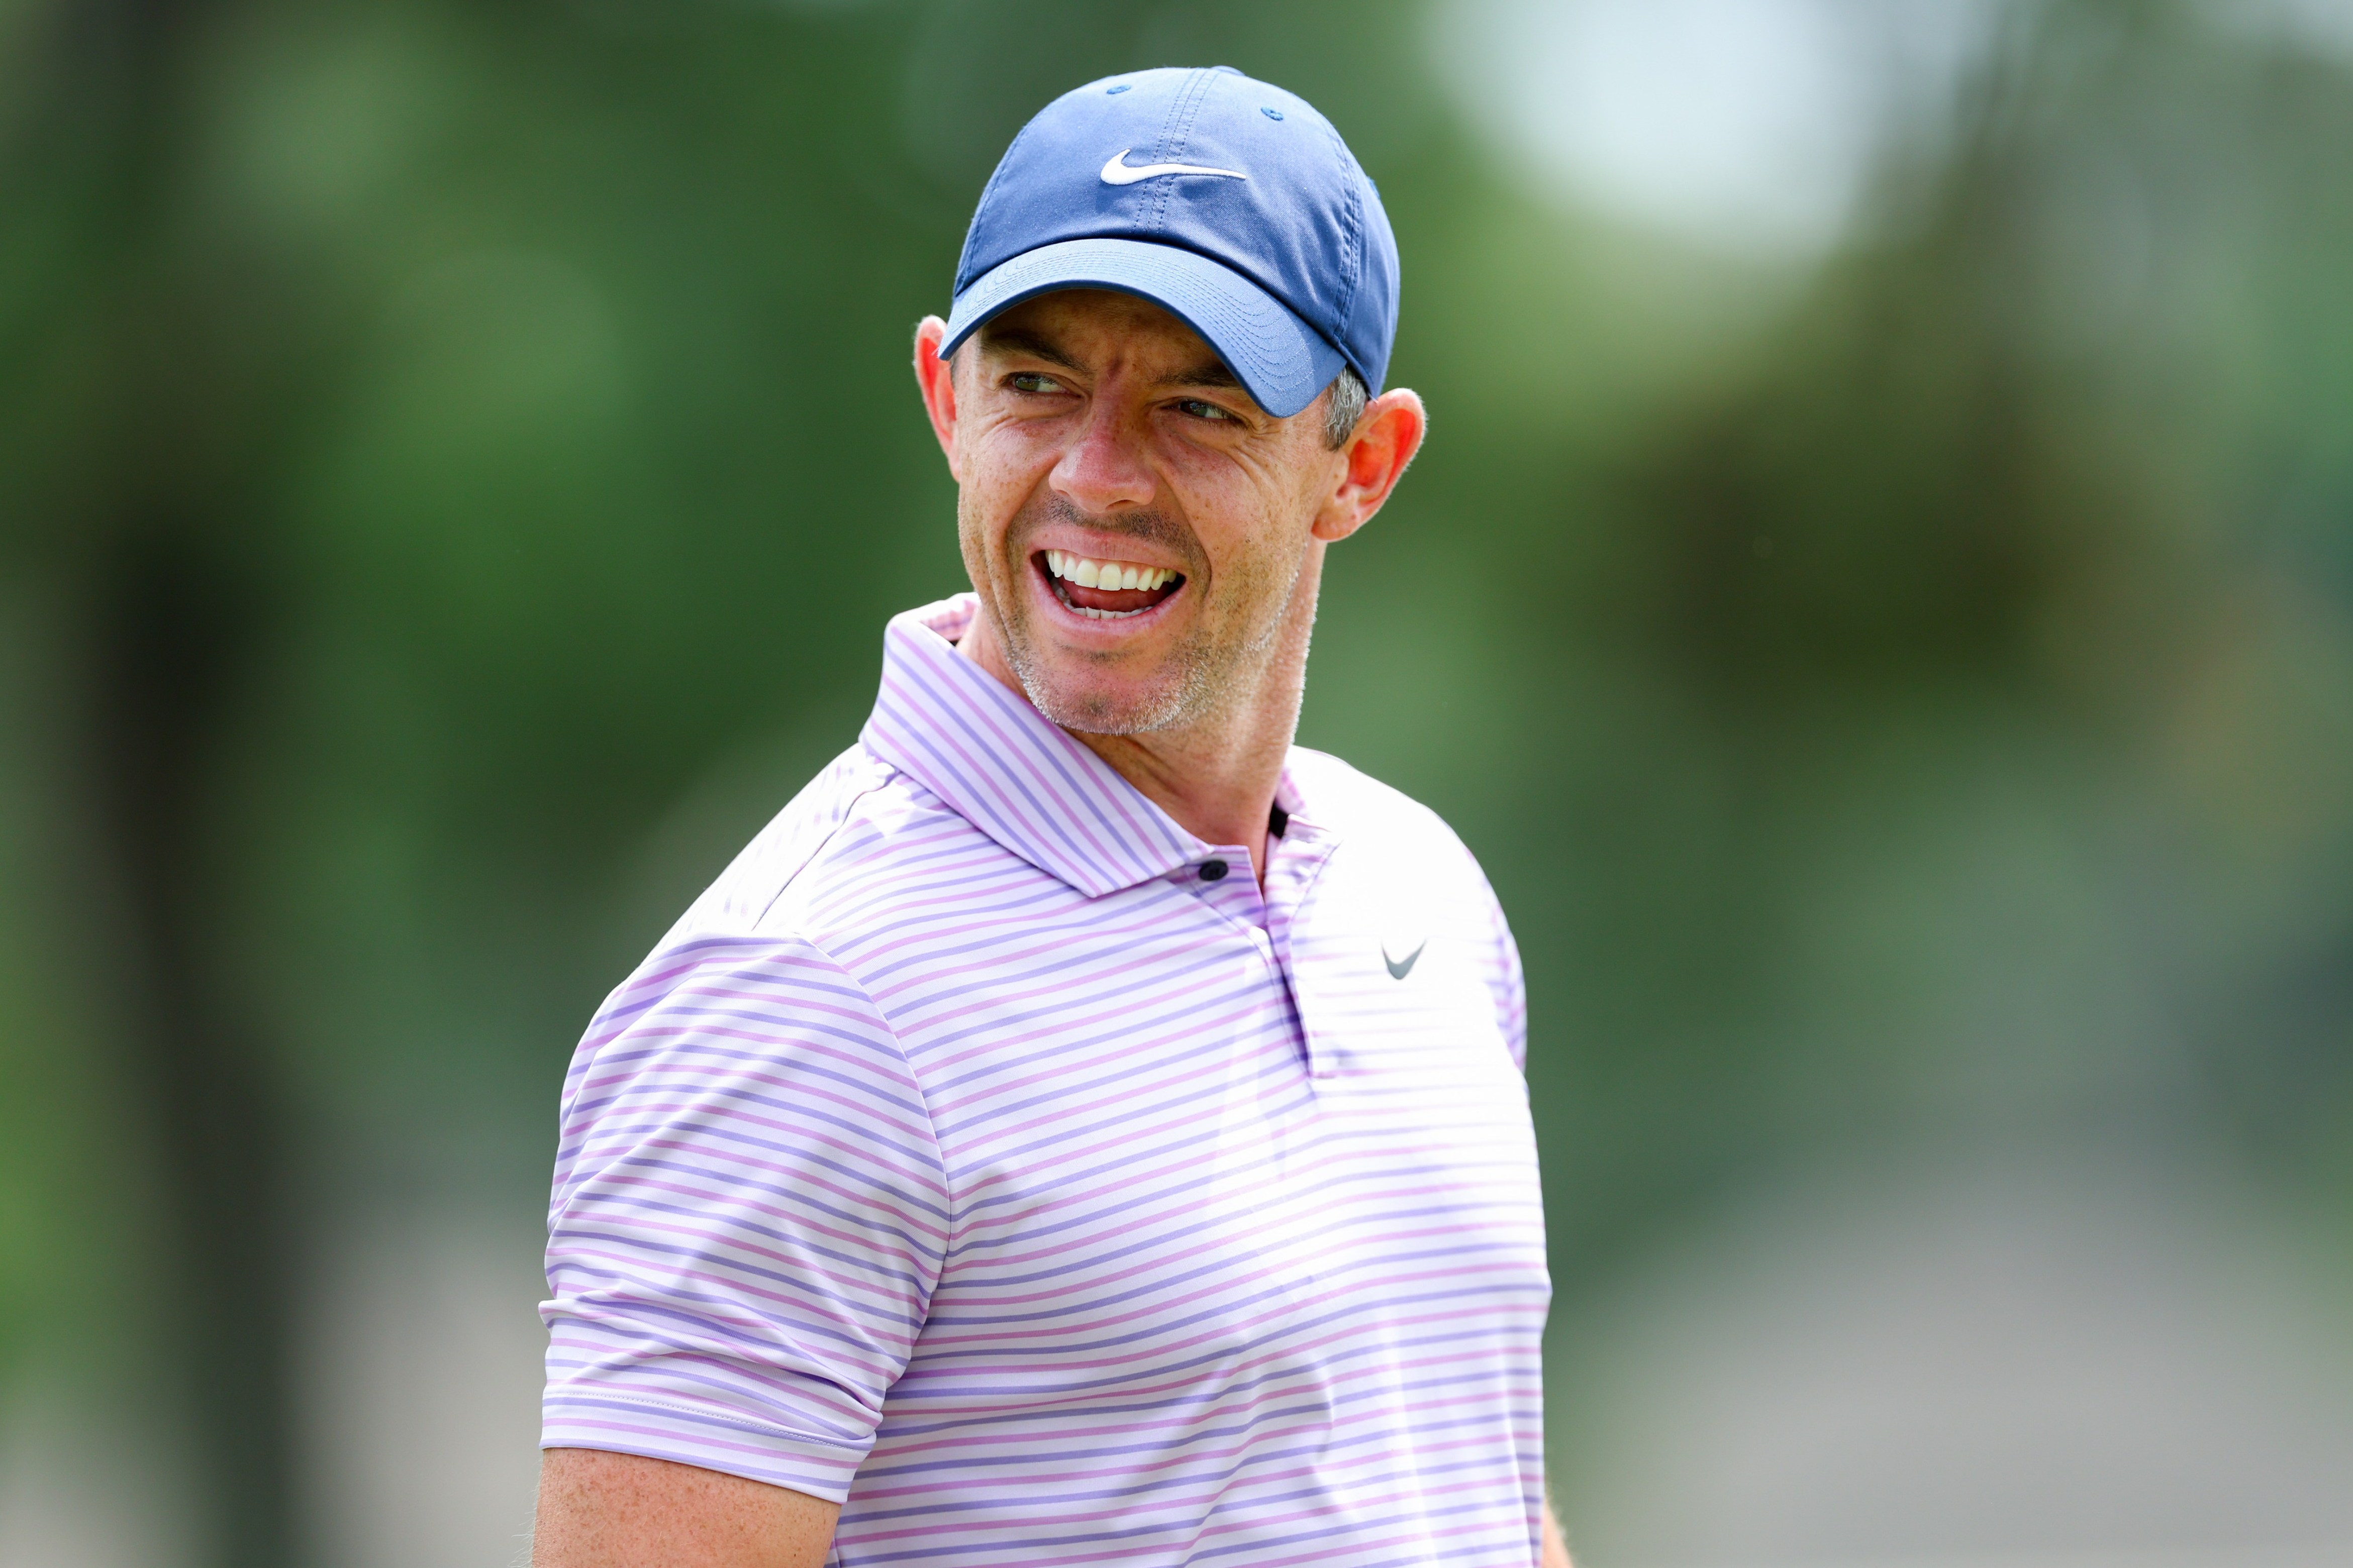 McIlroy’s latest U-turn comes as golf’s sums spiral further out of control